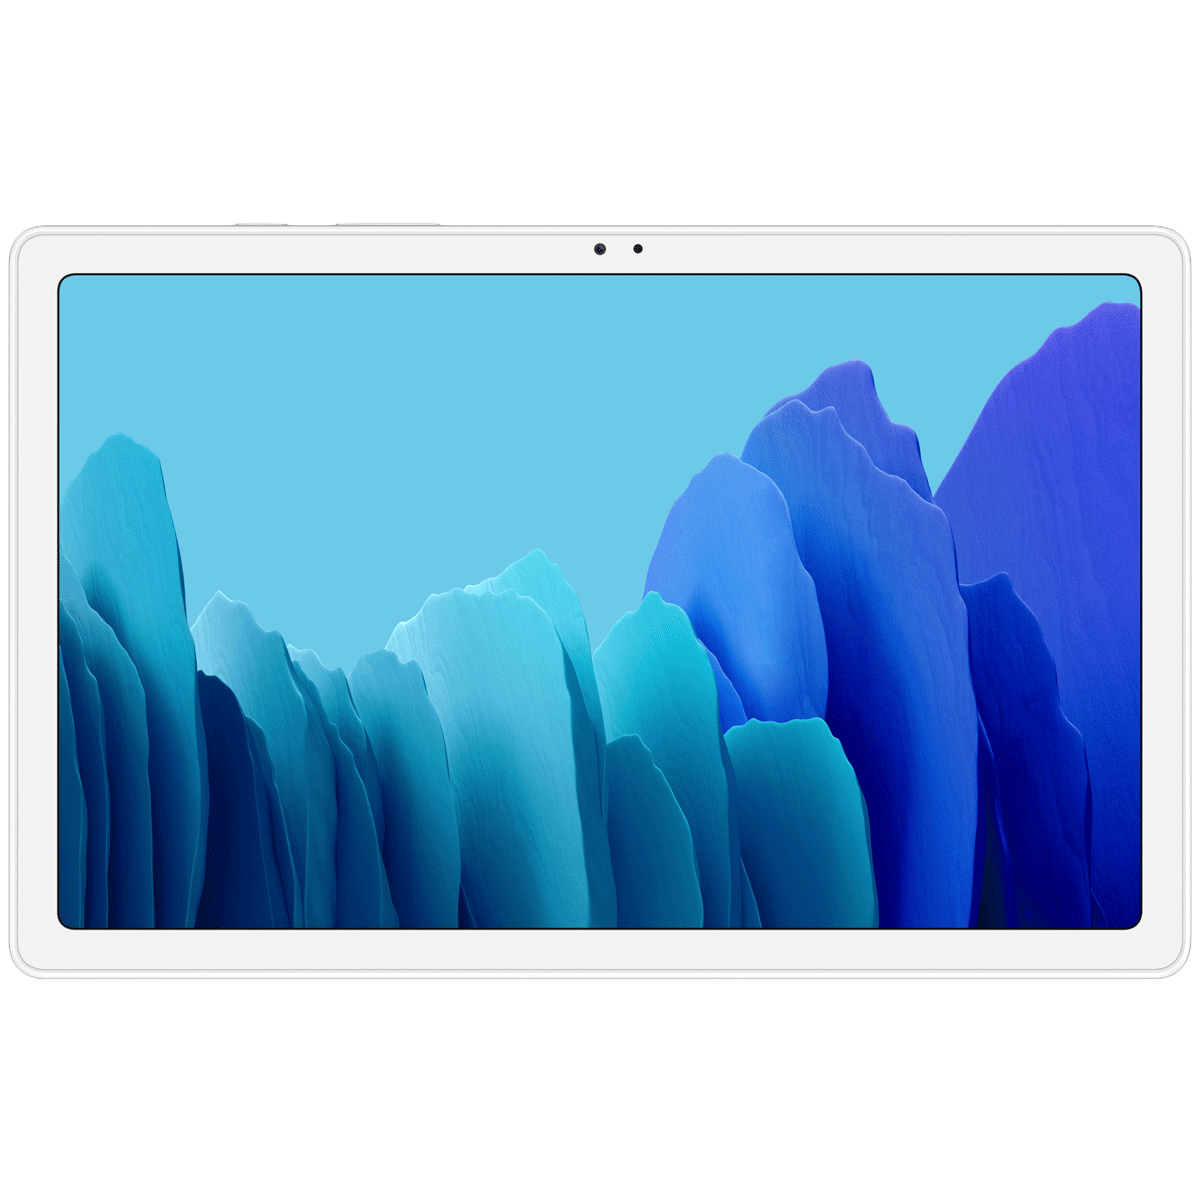 Samsung Galaxy Tab A7 WiFi + 4G Android Tablet (Android 10, Qualcomm Snapdragon 662, 26.41 cm (10.4 Inch), 3GB RAM, 32GB ROM, SM-T505NZSPINU, Silver)_1